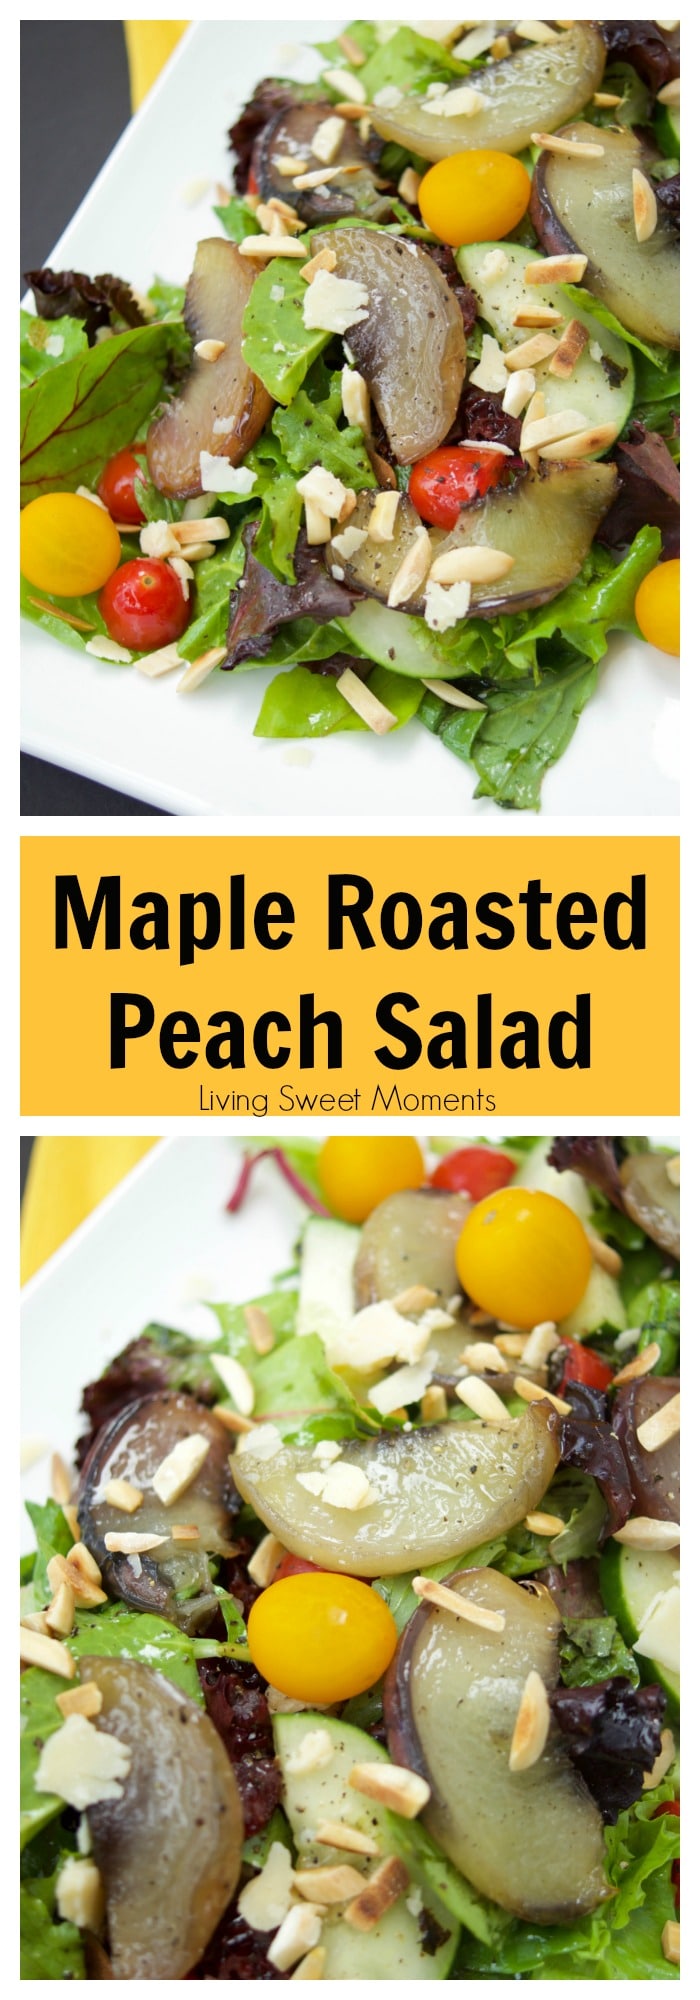 This tasty maple Roasted Peach Salad recipe is served with greens, tomatoes, almonds, parmesan and almonds, then tossed with a tangy maple vinaigrette.